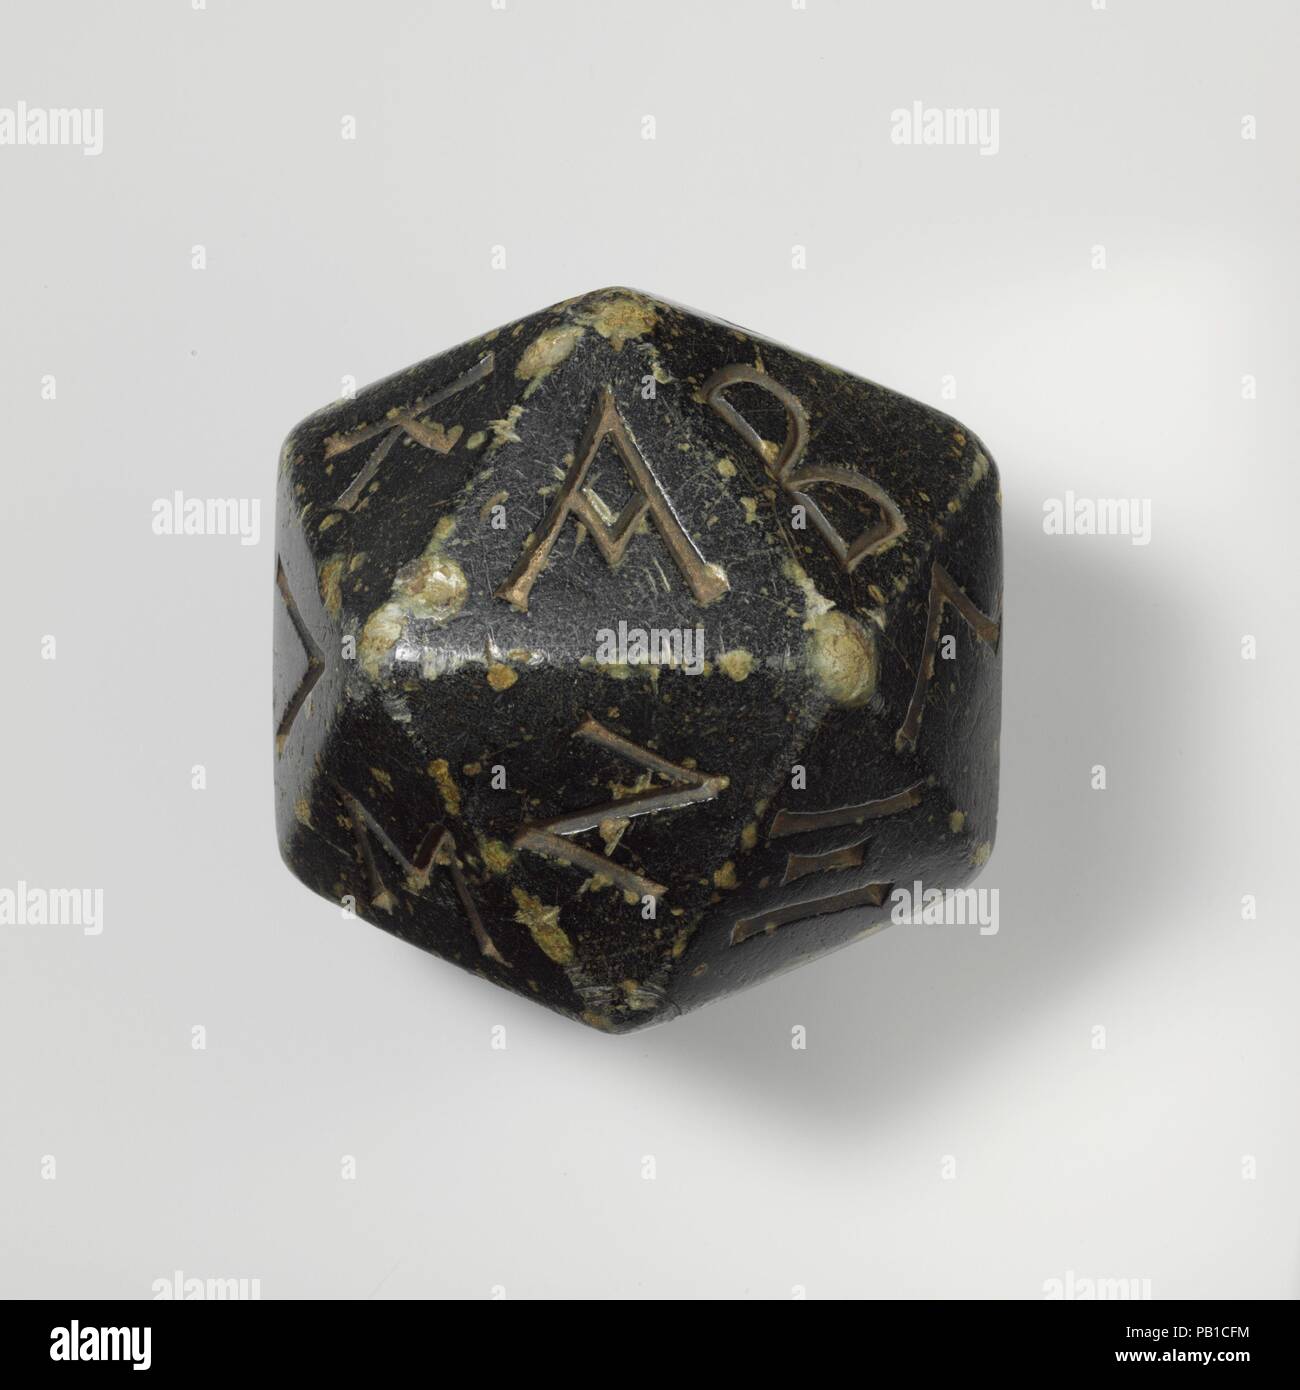 Greenstone polyhedron inscribed with letters of the Greek alphabet. Culture: Greek. Dimensions: Width (point to point greatest width): 3 3/8 in., 22.9oz. (8.6 cm, 647.9g)  Width (point to point smallest): 3 5/16 in. (8.4 cm)  Width (Side to side): 2 13/16 in. (7.2 cm). Date: 2nd-1st century B.C..  The polyhedron has 20 sides, each inscribed with a letter of the Greek alphabet from A (alpha) to Y (upsilon), so that only the last three letters (chi, psi, and omega) are missing. See a faience example (37.11.3) also displayed in this case. Museum: Metropolitan Museum of Art, New York, USA. Stock Photo